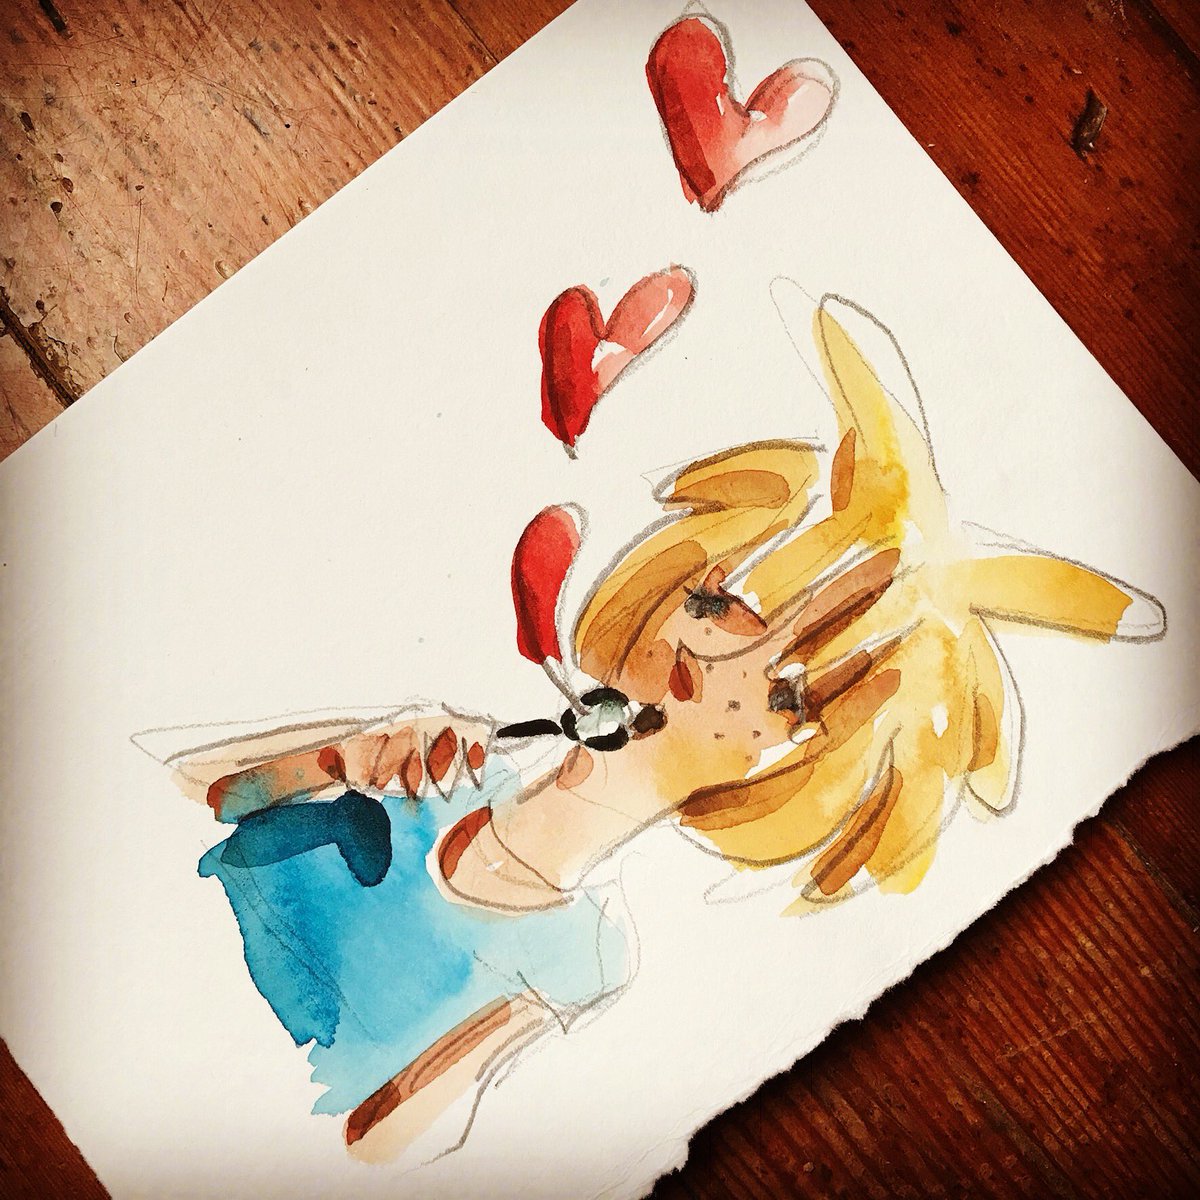 Impromptu Zoo Watercolor for V~day. #blowheartbubbles #bubblesoflove #heart #watercolor #valentine #valentines #happyvalentines #happyvalentinesday #feb14 #sweetheart #kidlit #mgbook #mgvalentine #mgkids #sillyhearts #lovelovelove